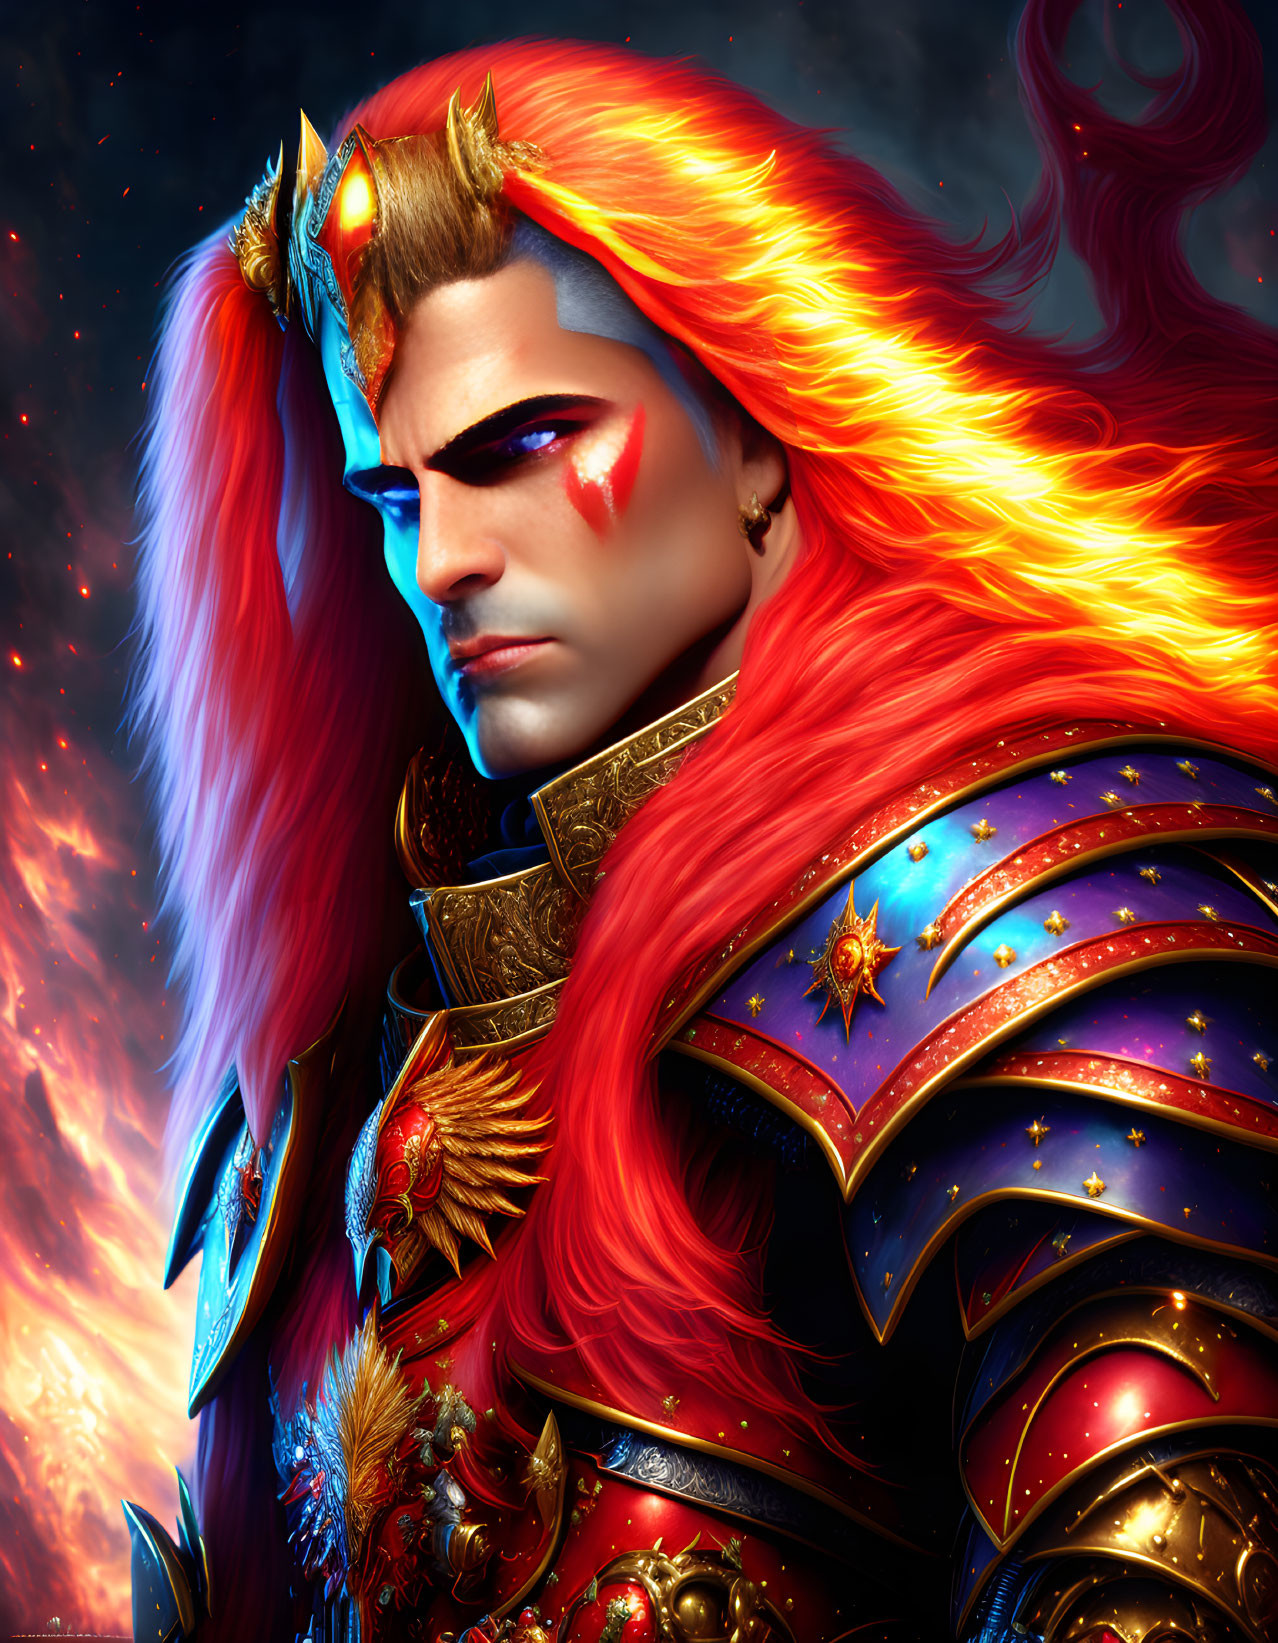 Illustrated warrior with fiery red hair in regal blue and gold armor against blazing backdrop